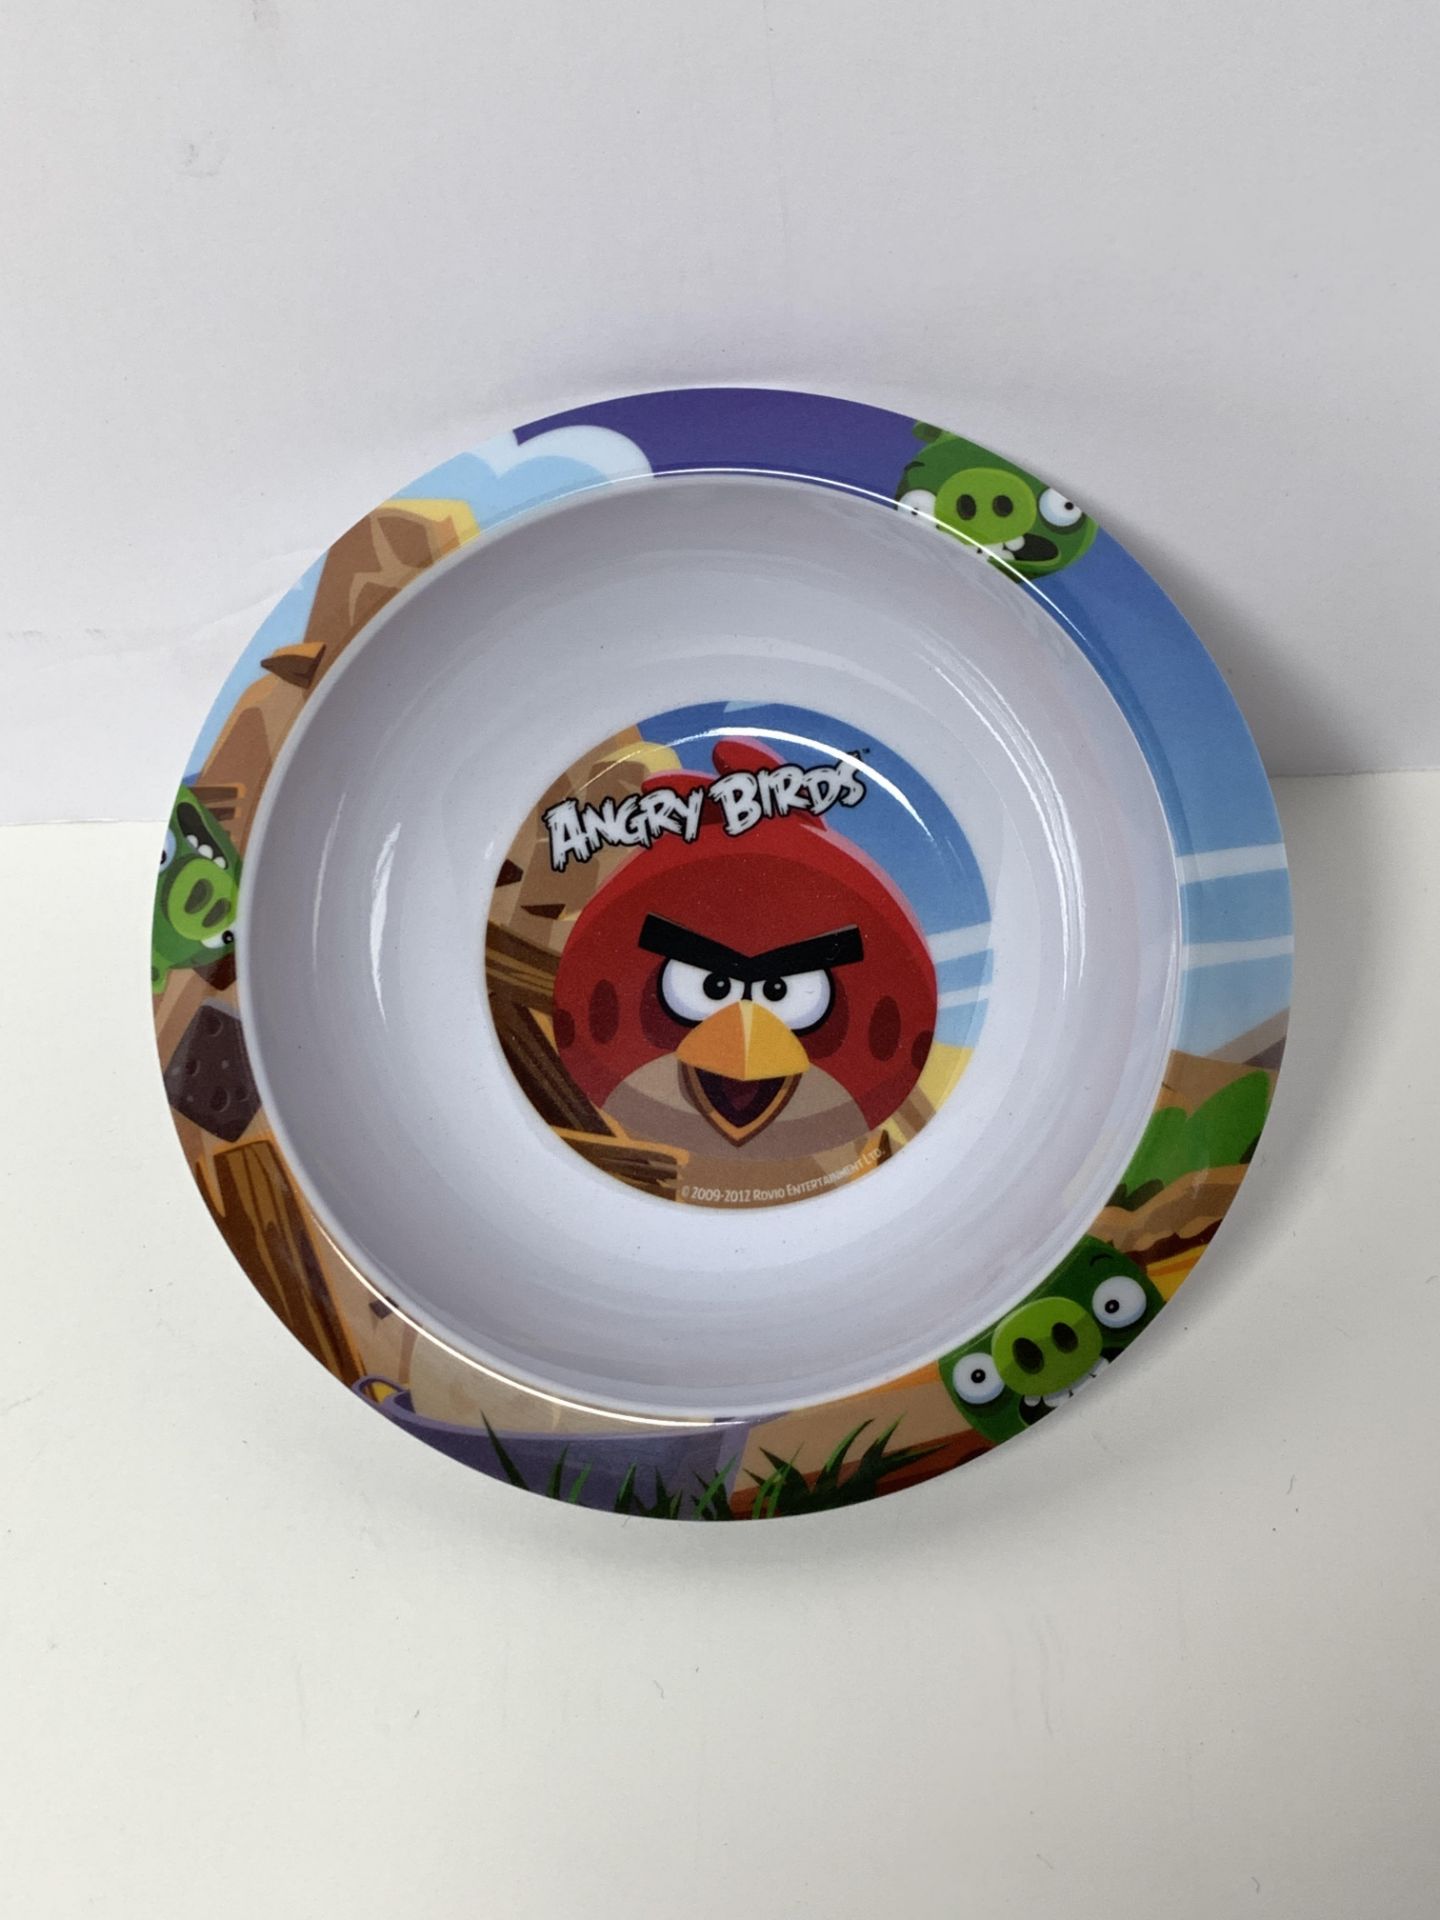 4,100 WHOLESALE PRICED Angry Birds Branded Melamine Bowls, $.12 EA! - Image 2 of 5